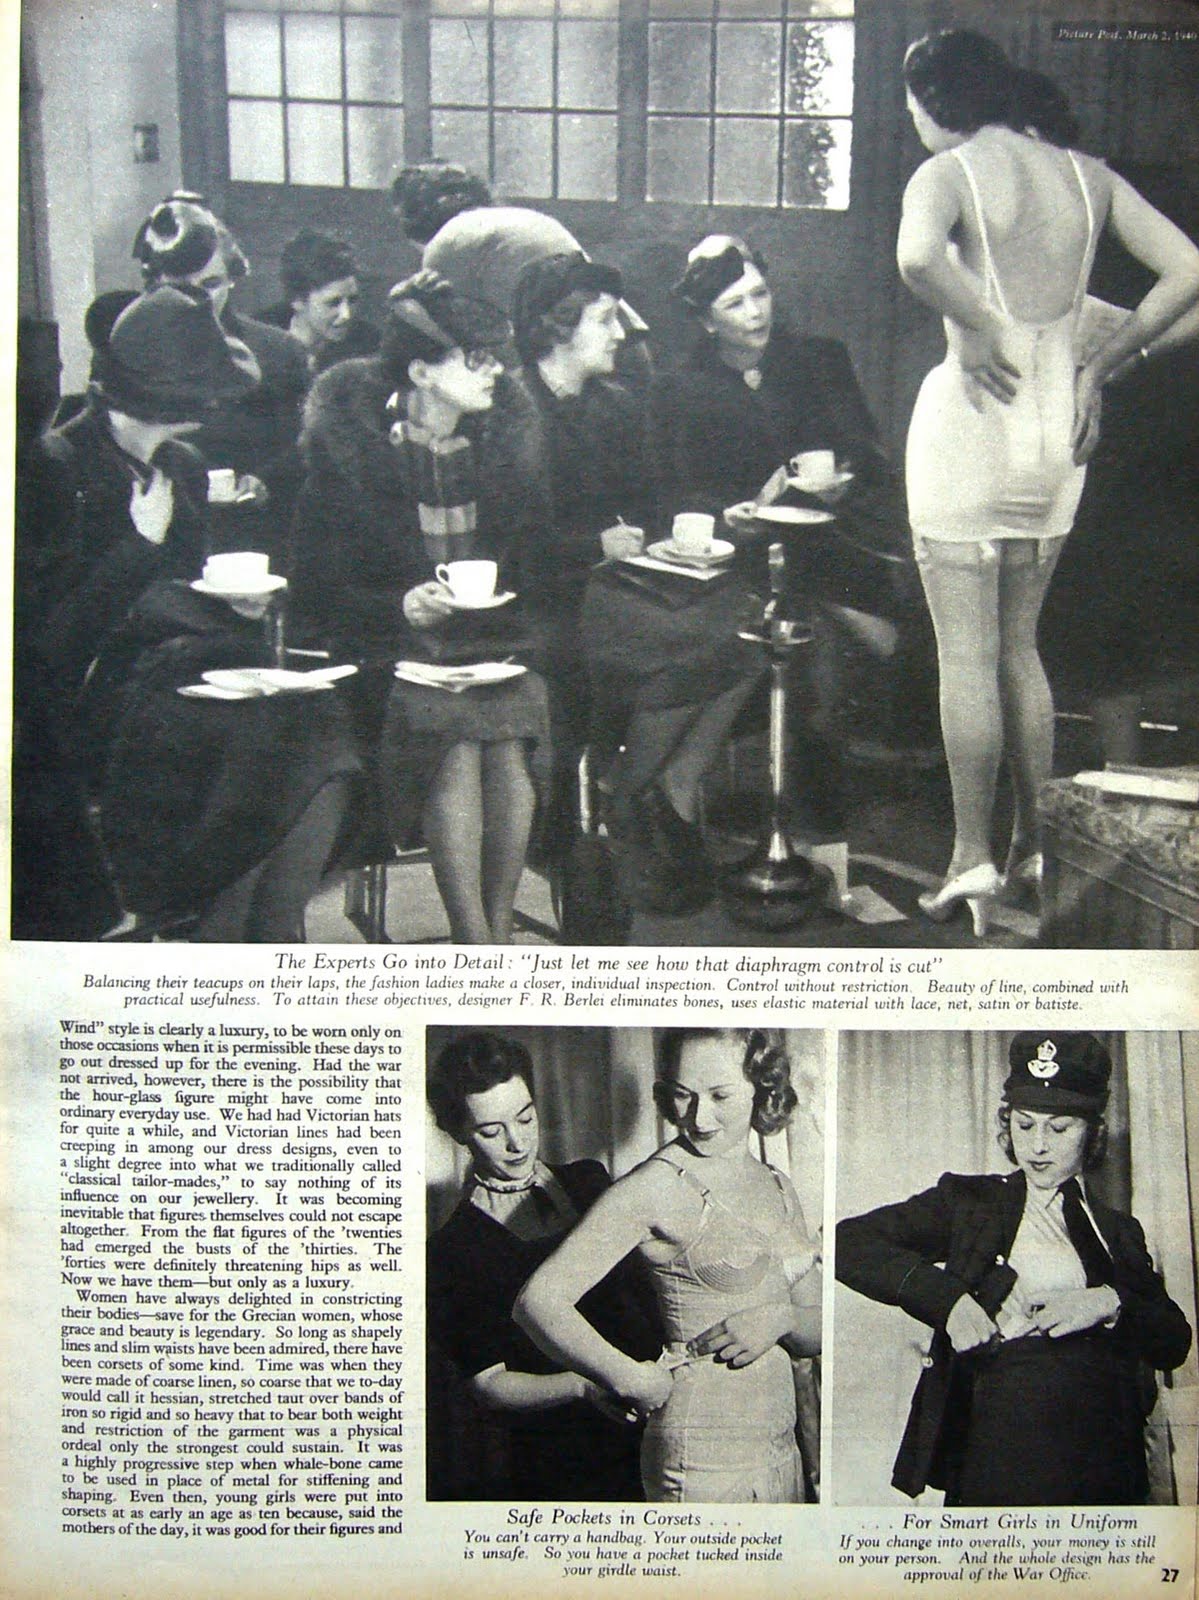 Fashionable Forties: Girdles and corsets and the right shape, oh my